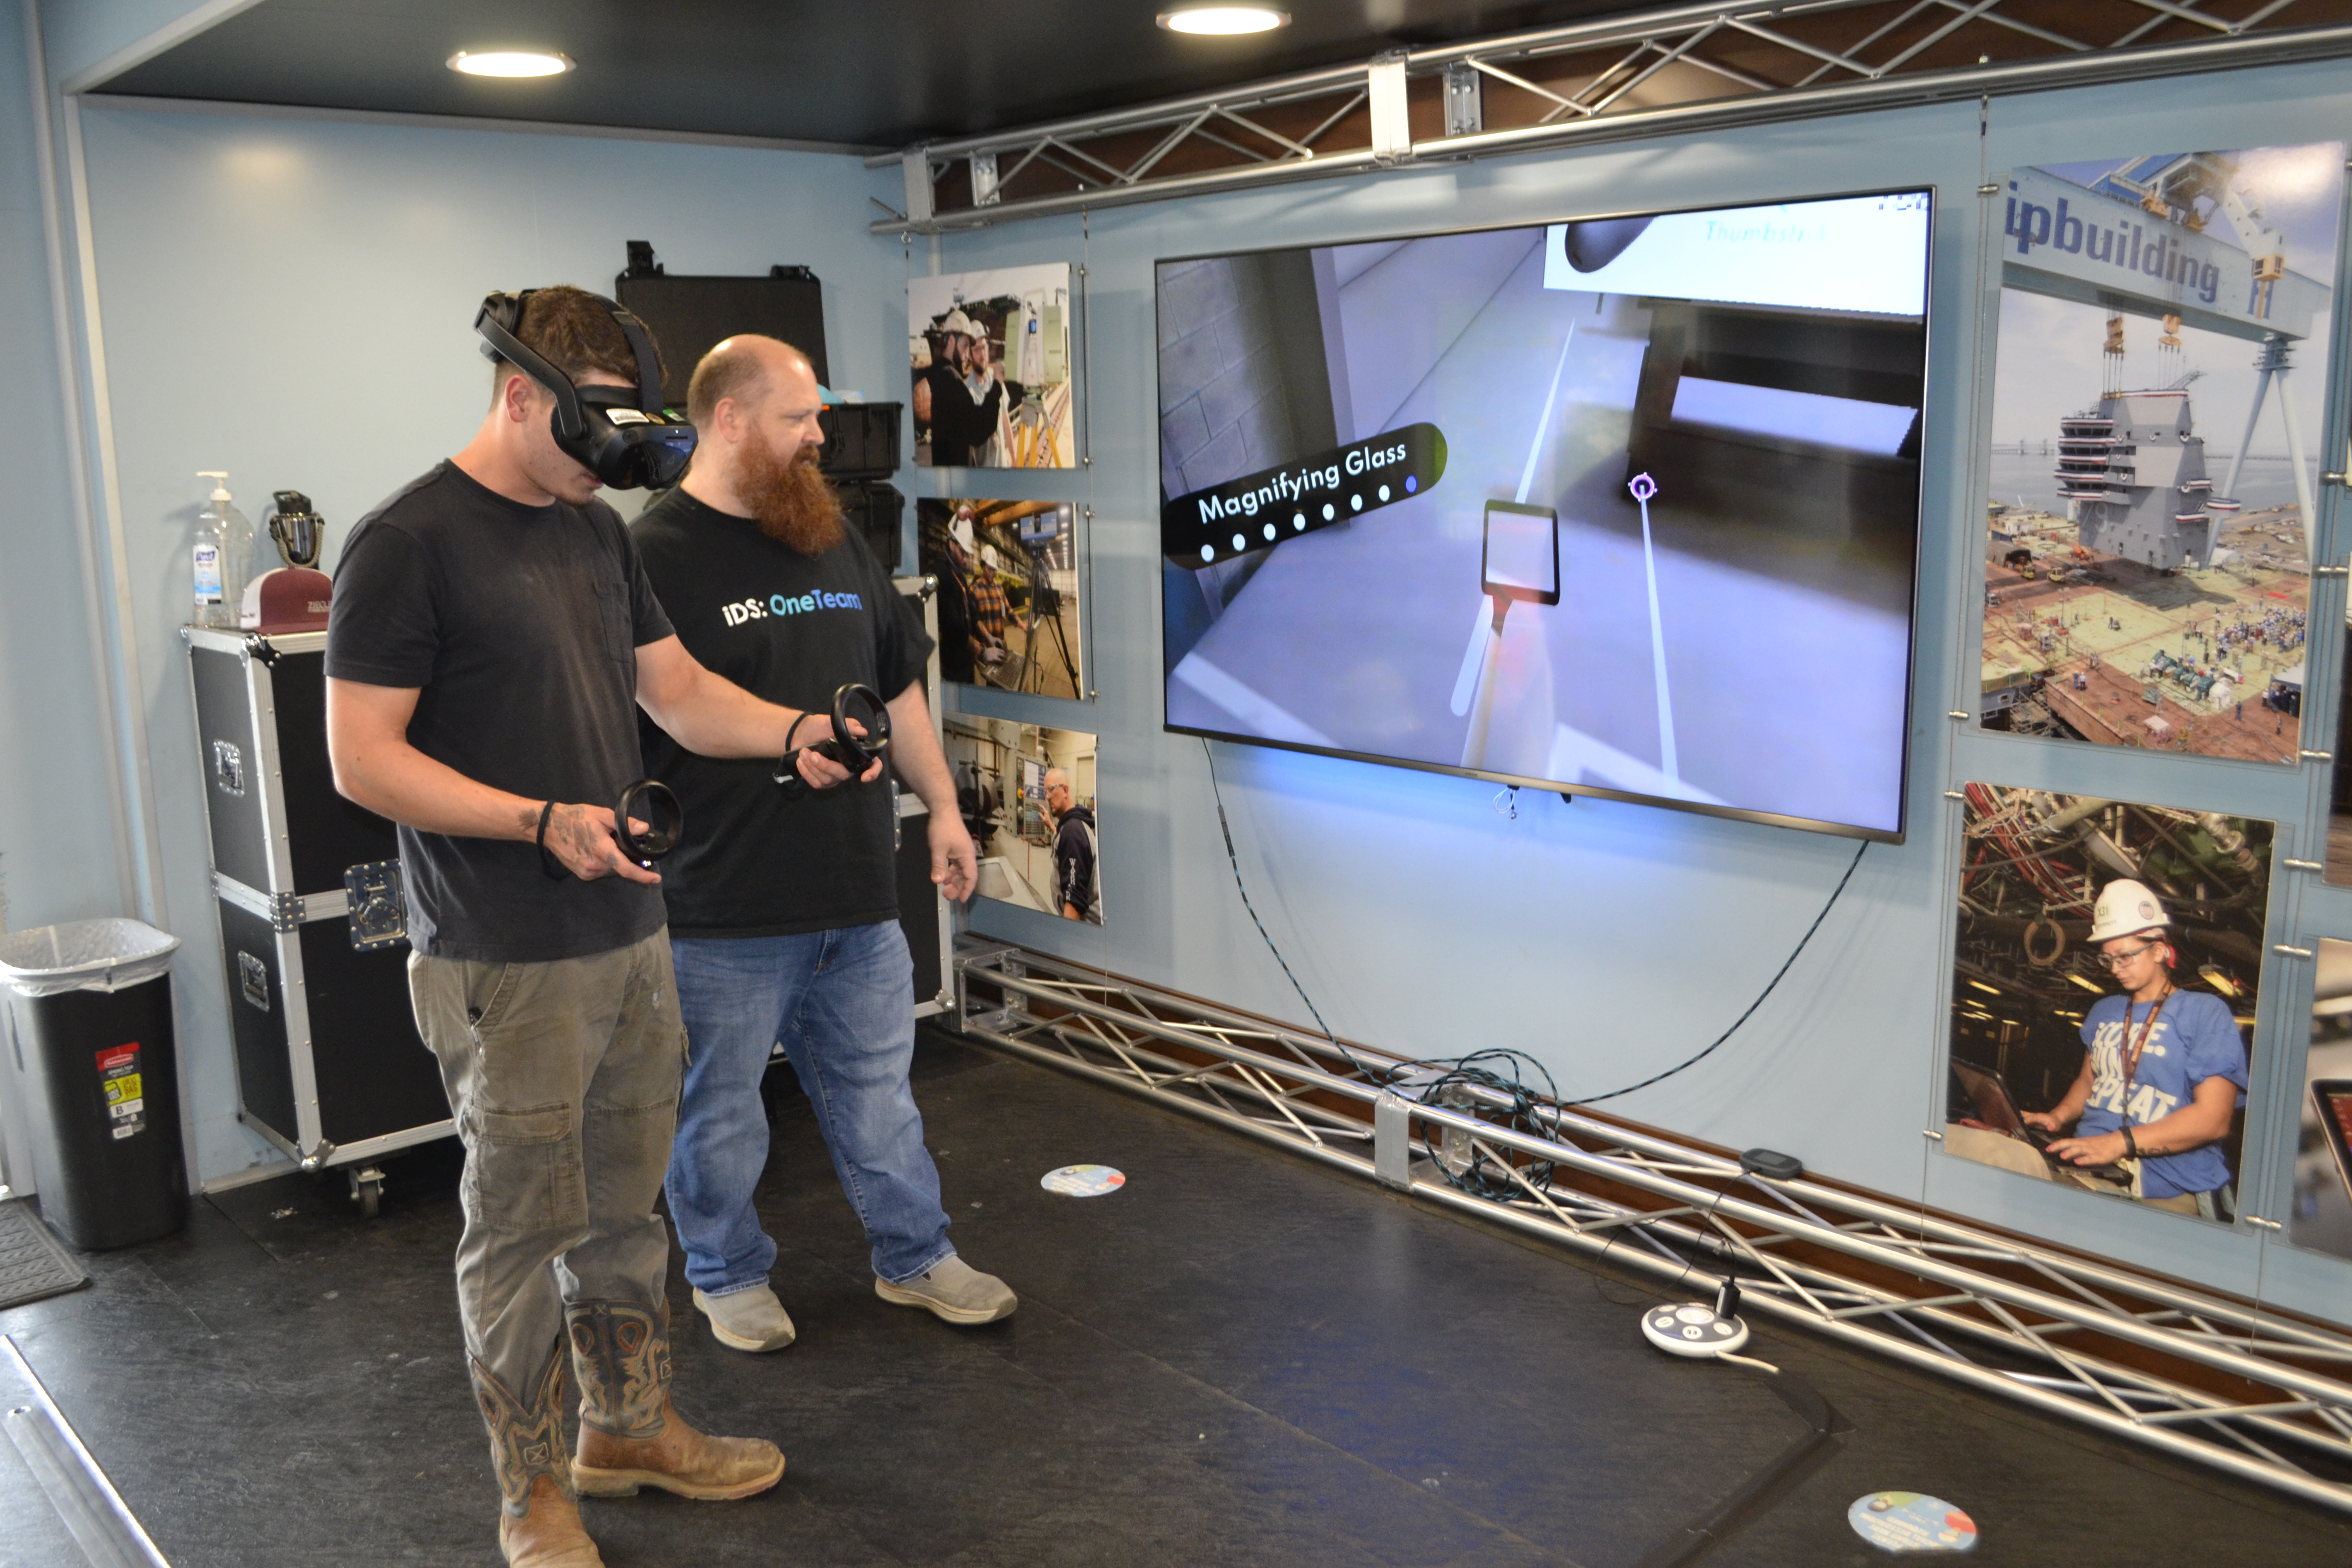 A virtual reality training station was available at the exhibit.